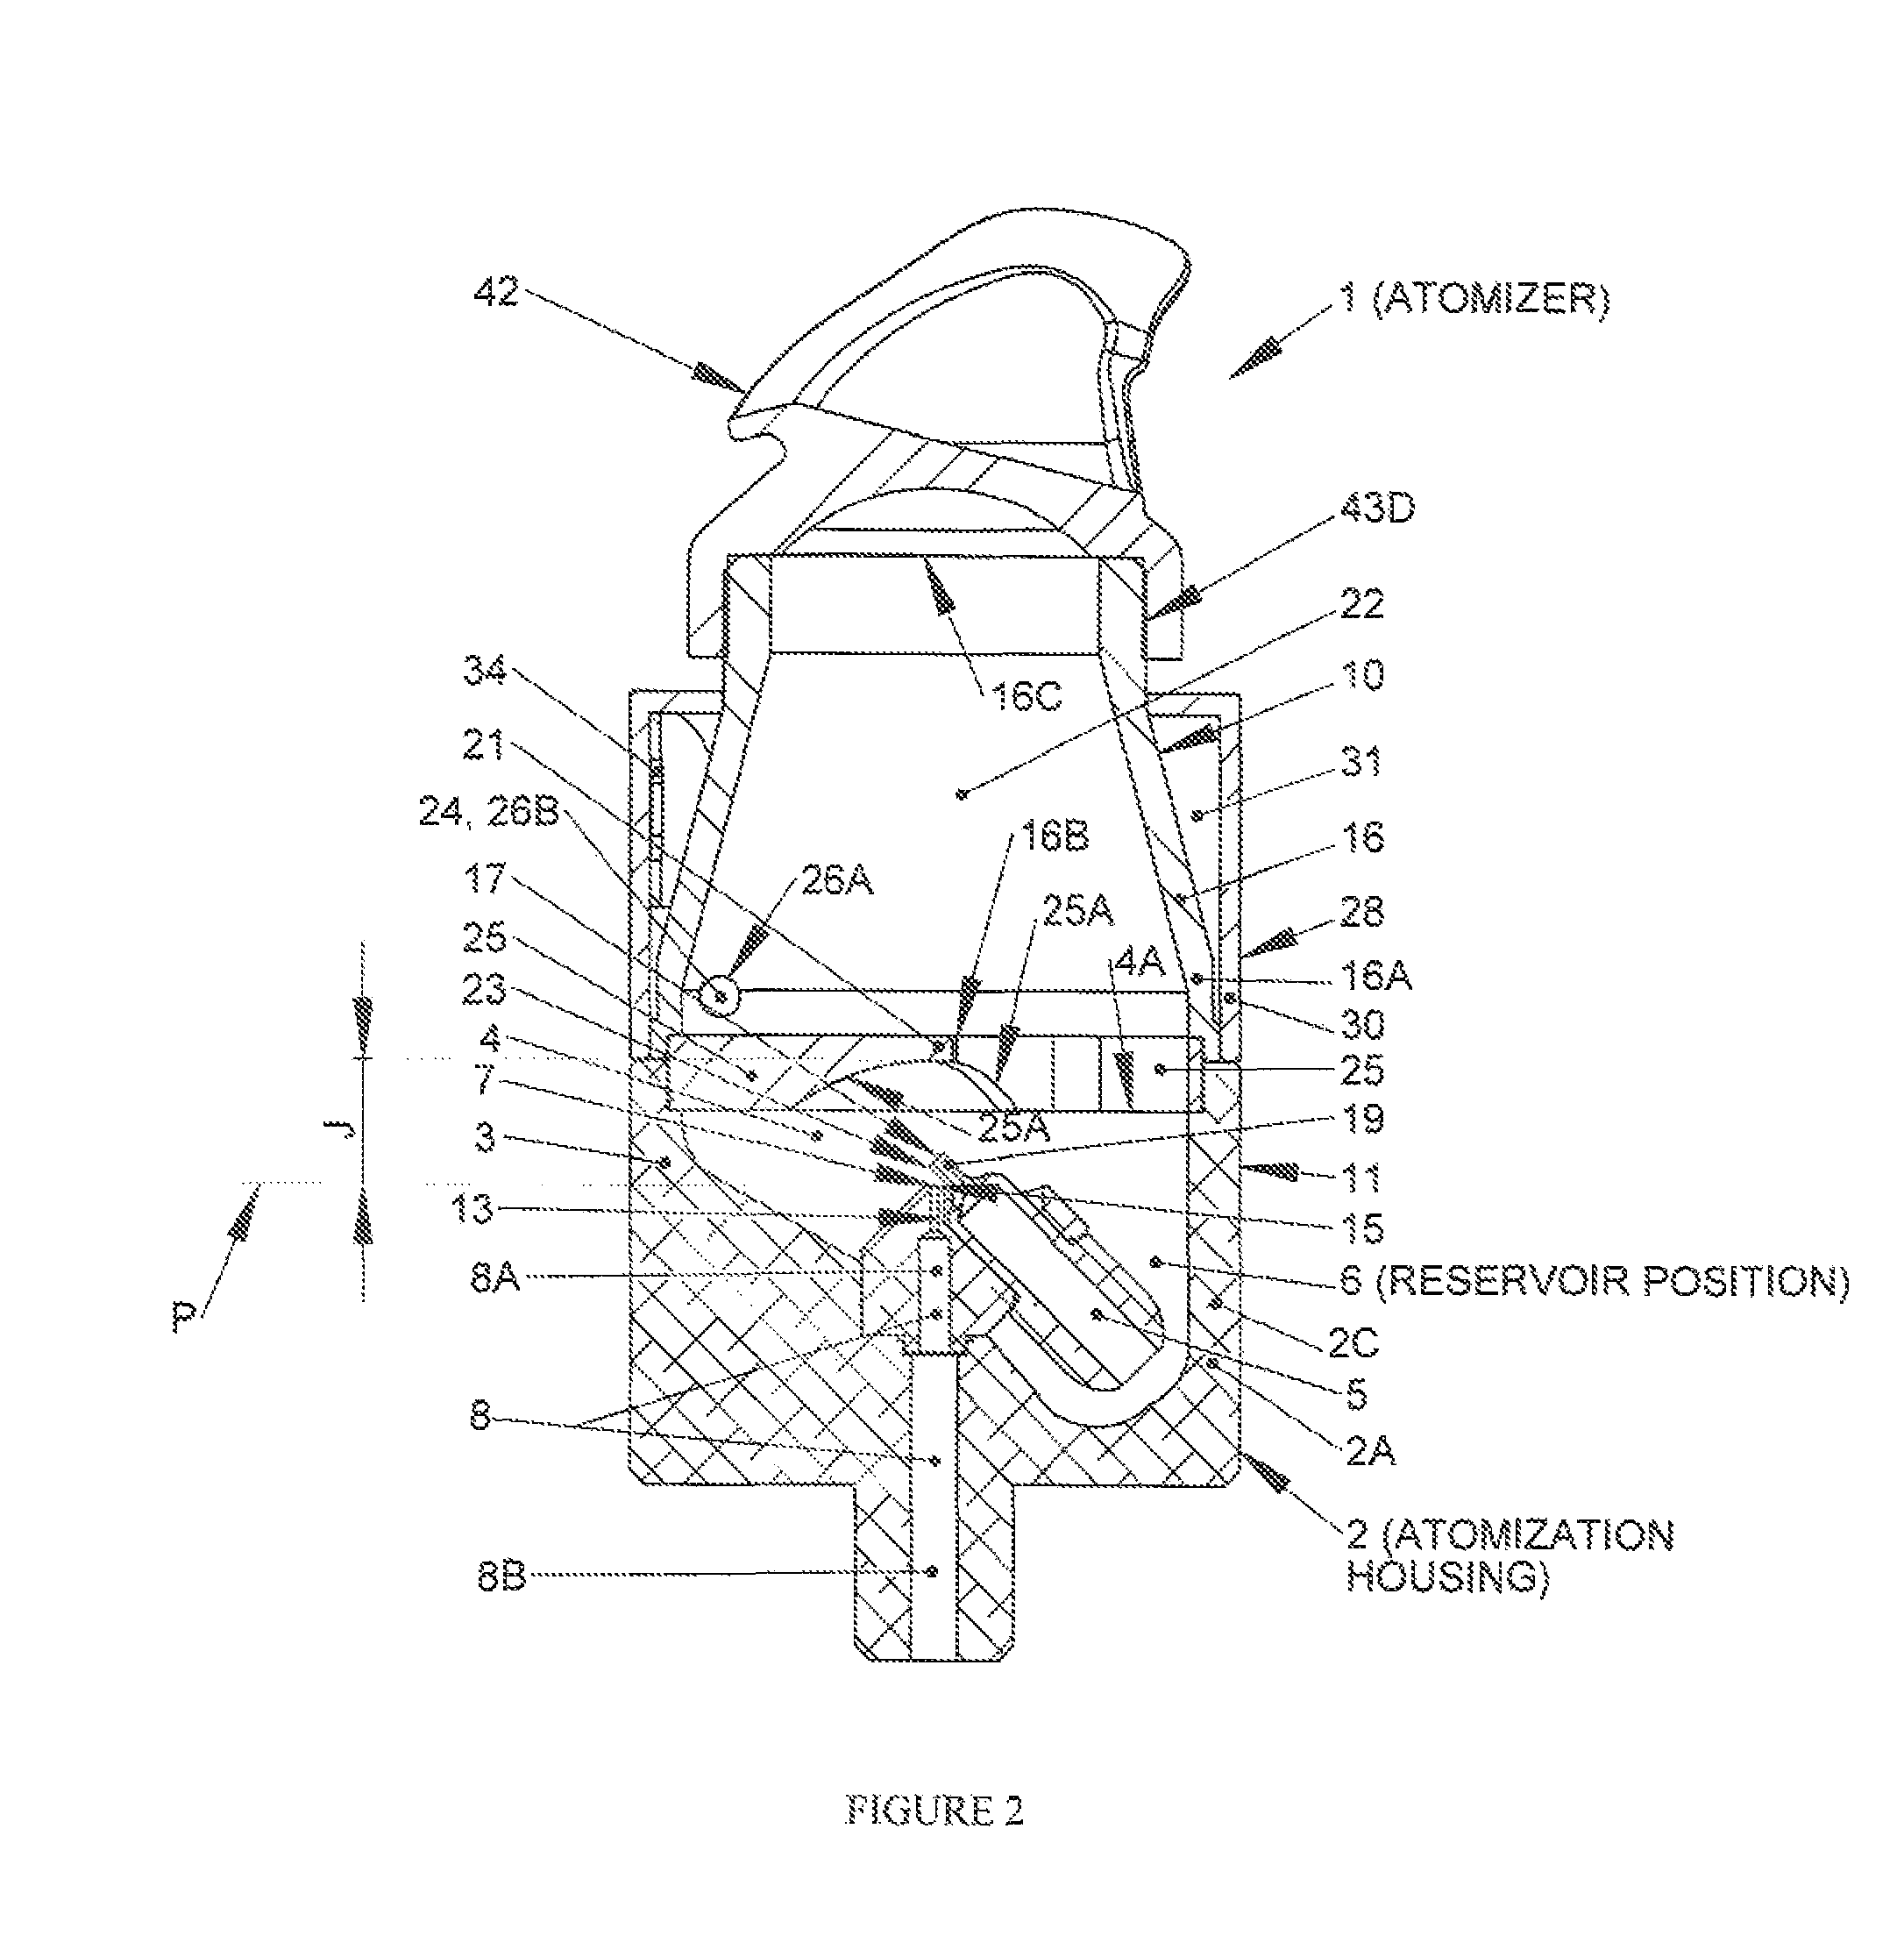 Aerosol generating and delivery device